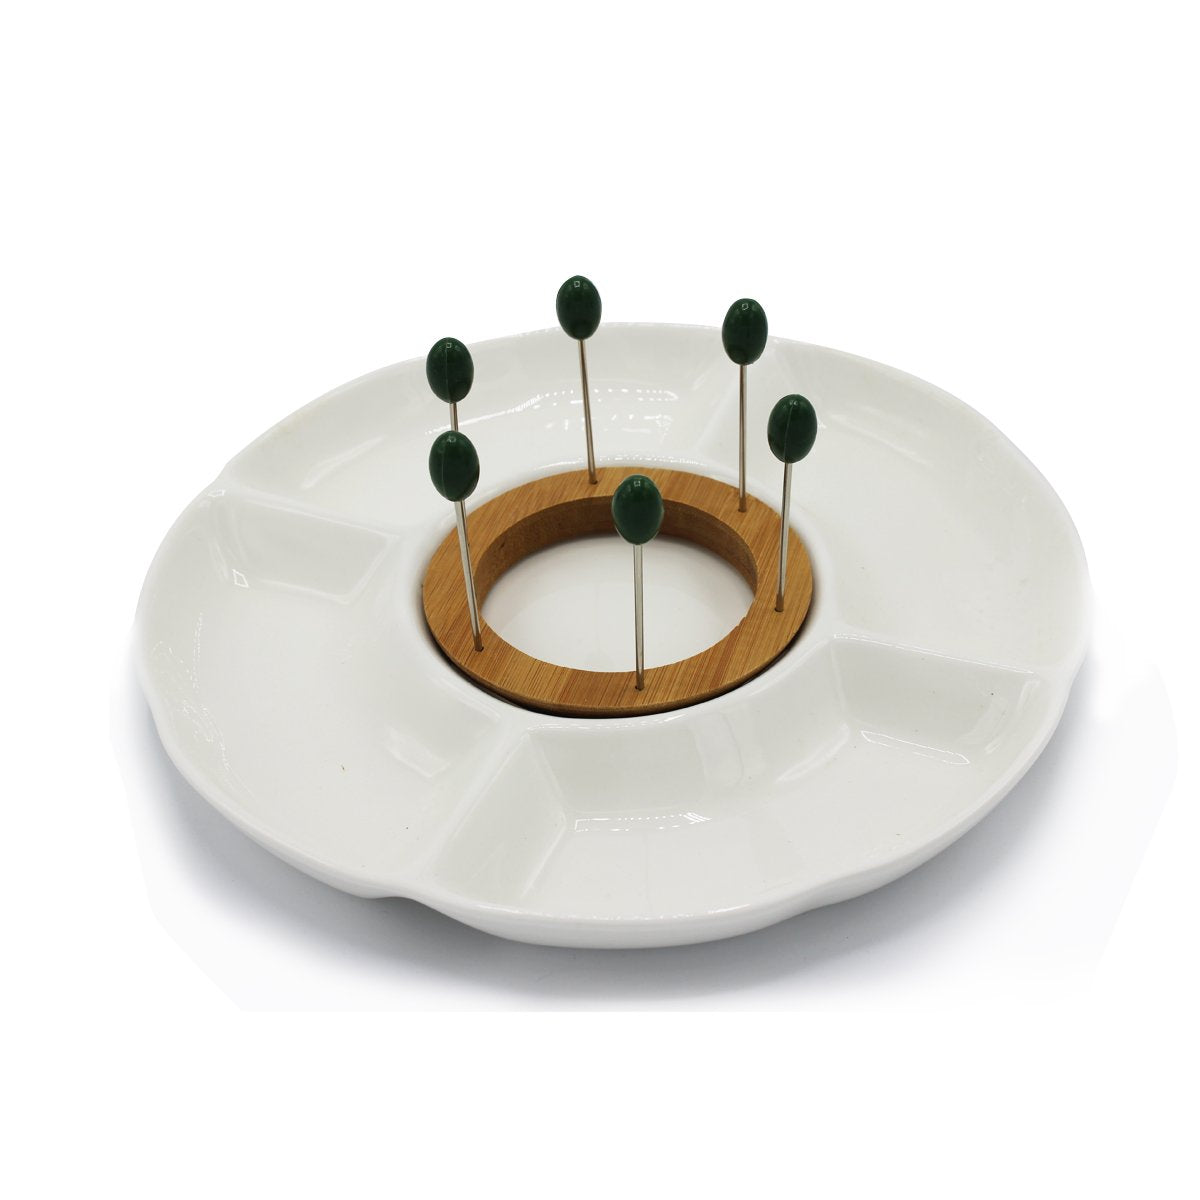 Snack Plate with 6 Forks - waseeh.com